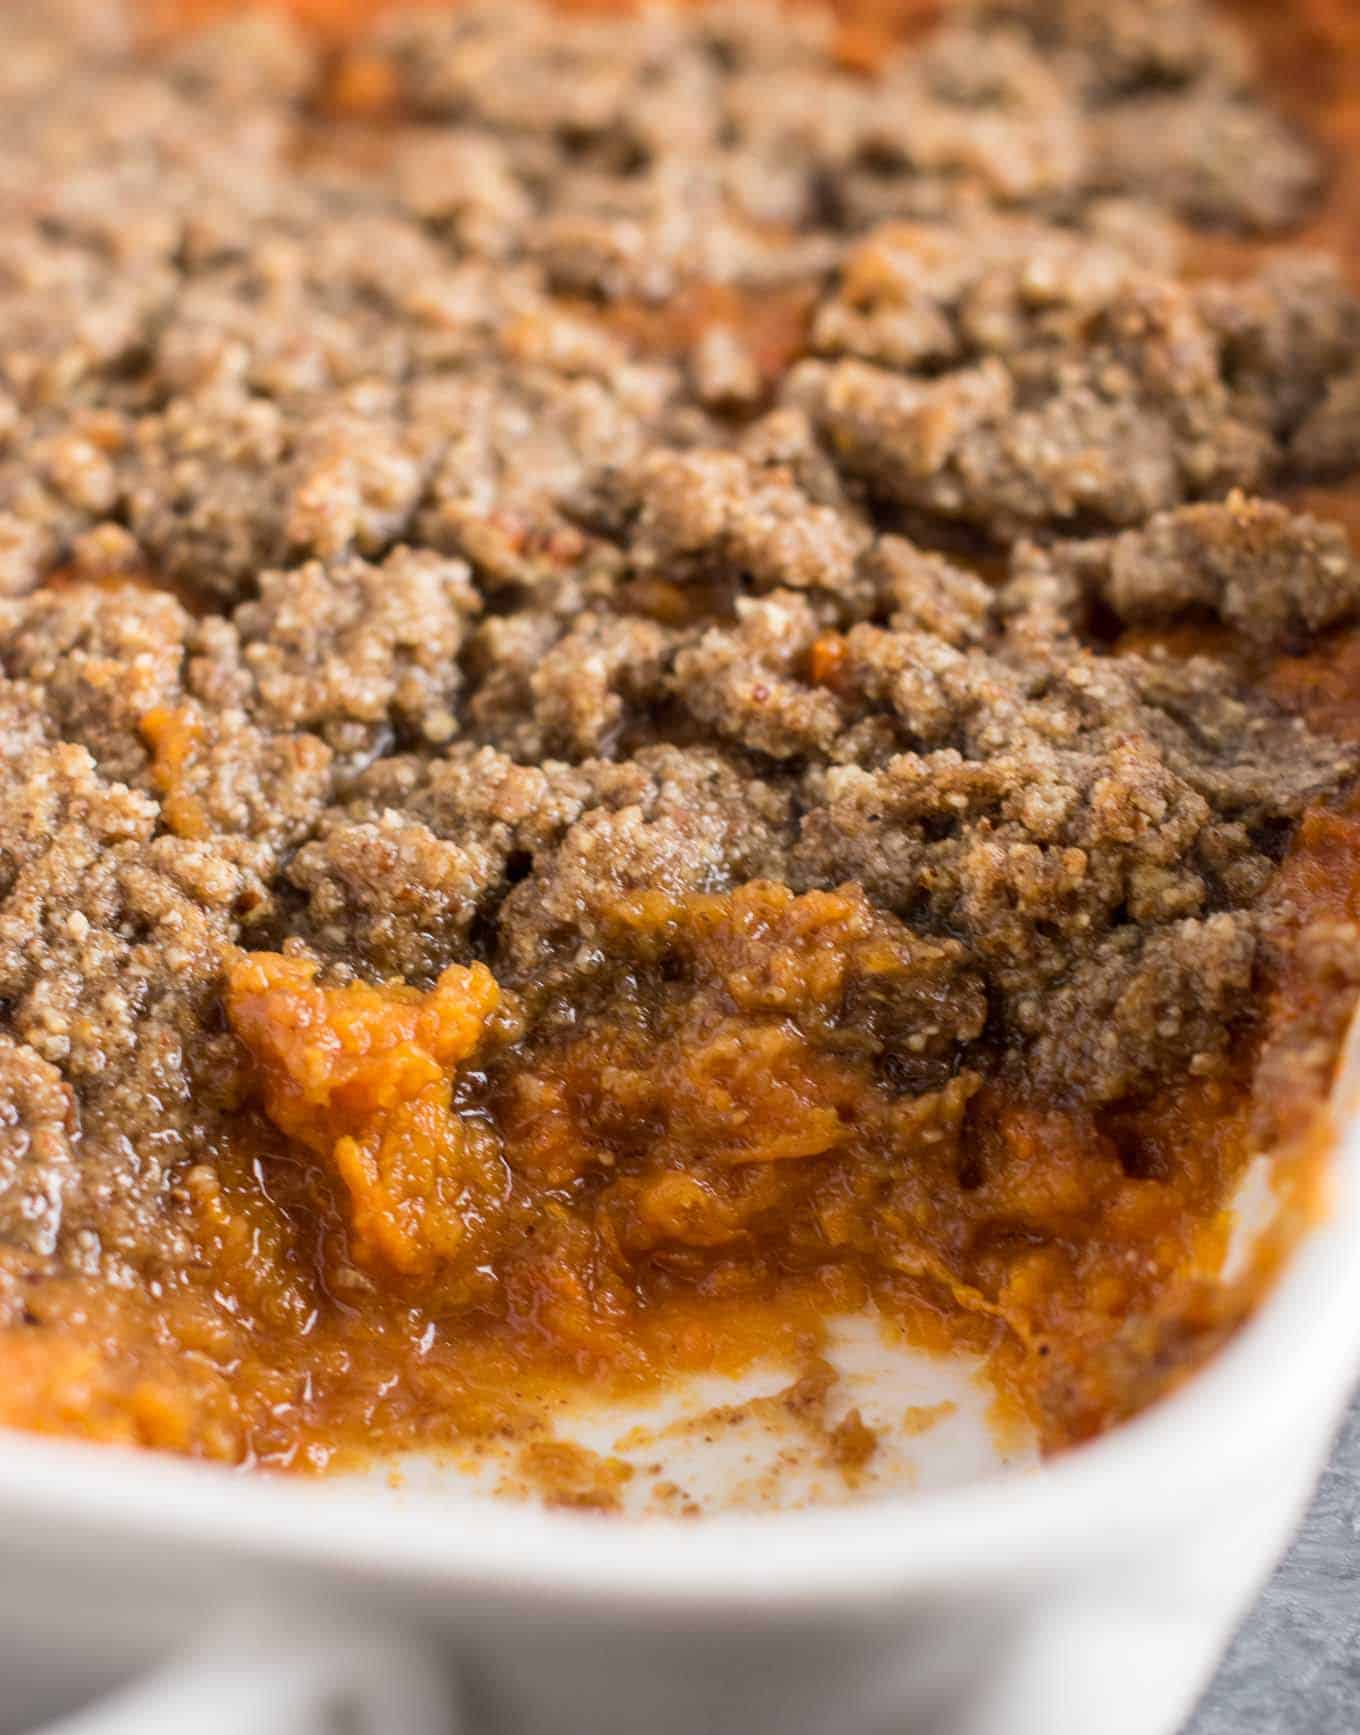 This sweet potato casserole with pecan crumble is the BEST side for your Thanksgiving table! Melt in your mouth buttery sweet potatoes are topped with a salty sweet gluten free pecan crumble. You will be fighting for seconds! #thanksgiving #sweetpotatocasserole #vegetarian #glutenfree